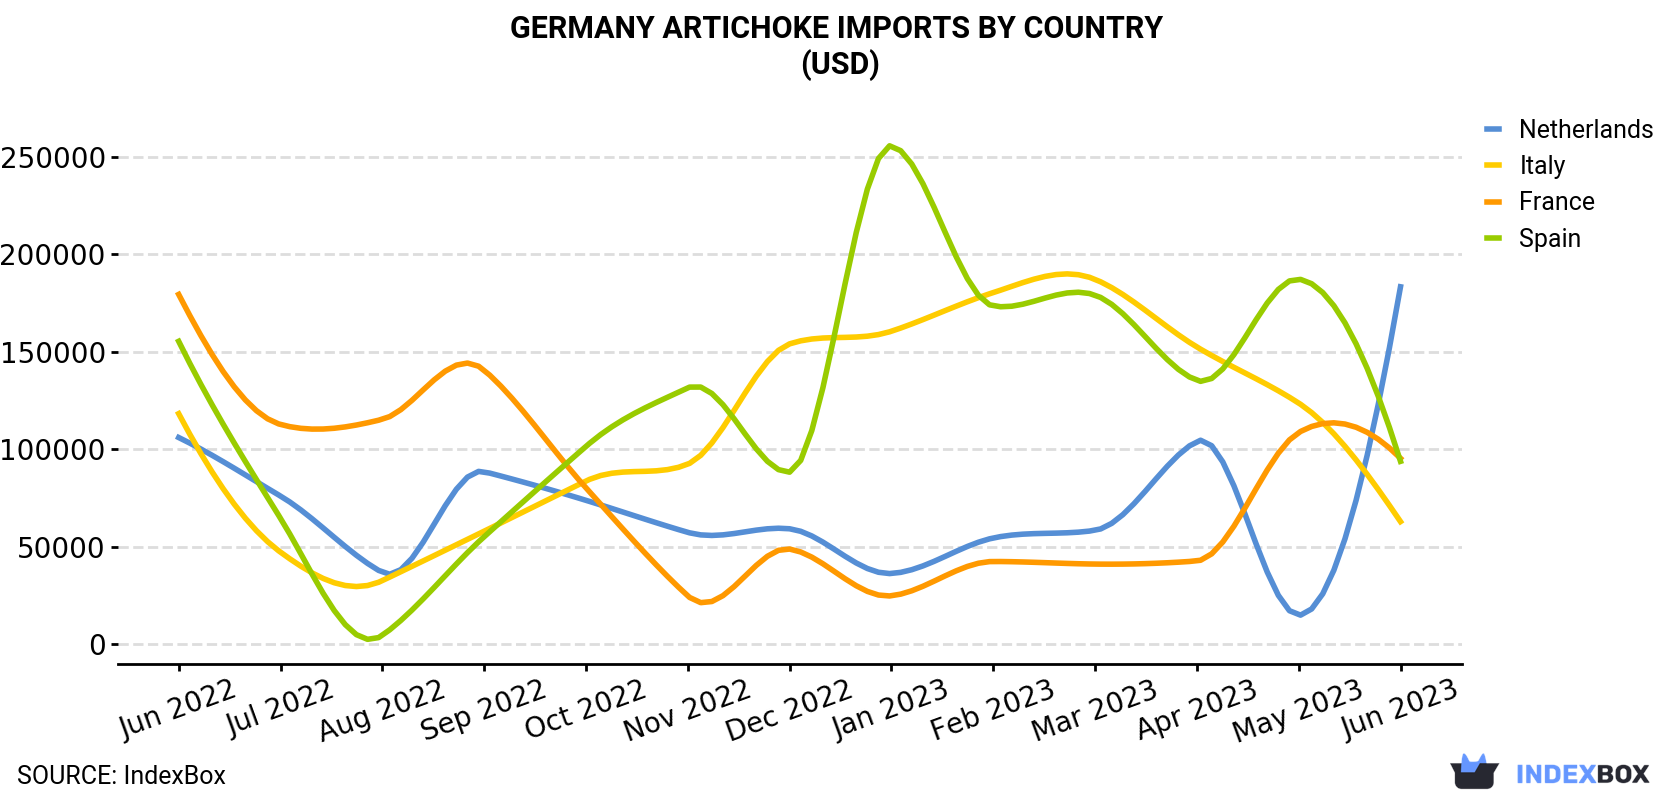 Germany Artichoke Imports By Country (USD)